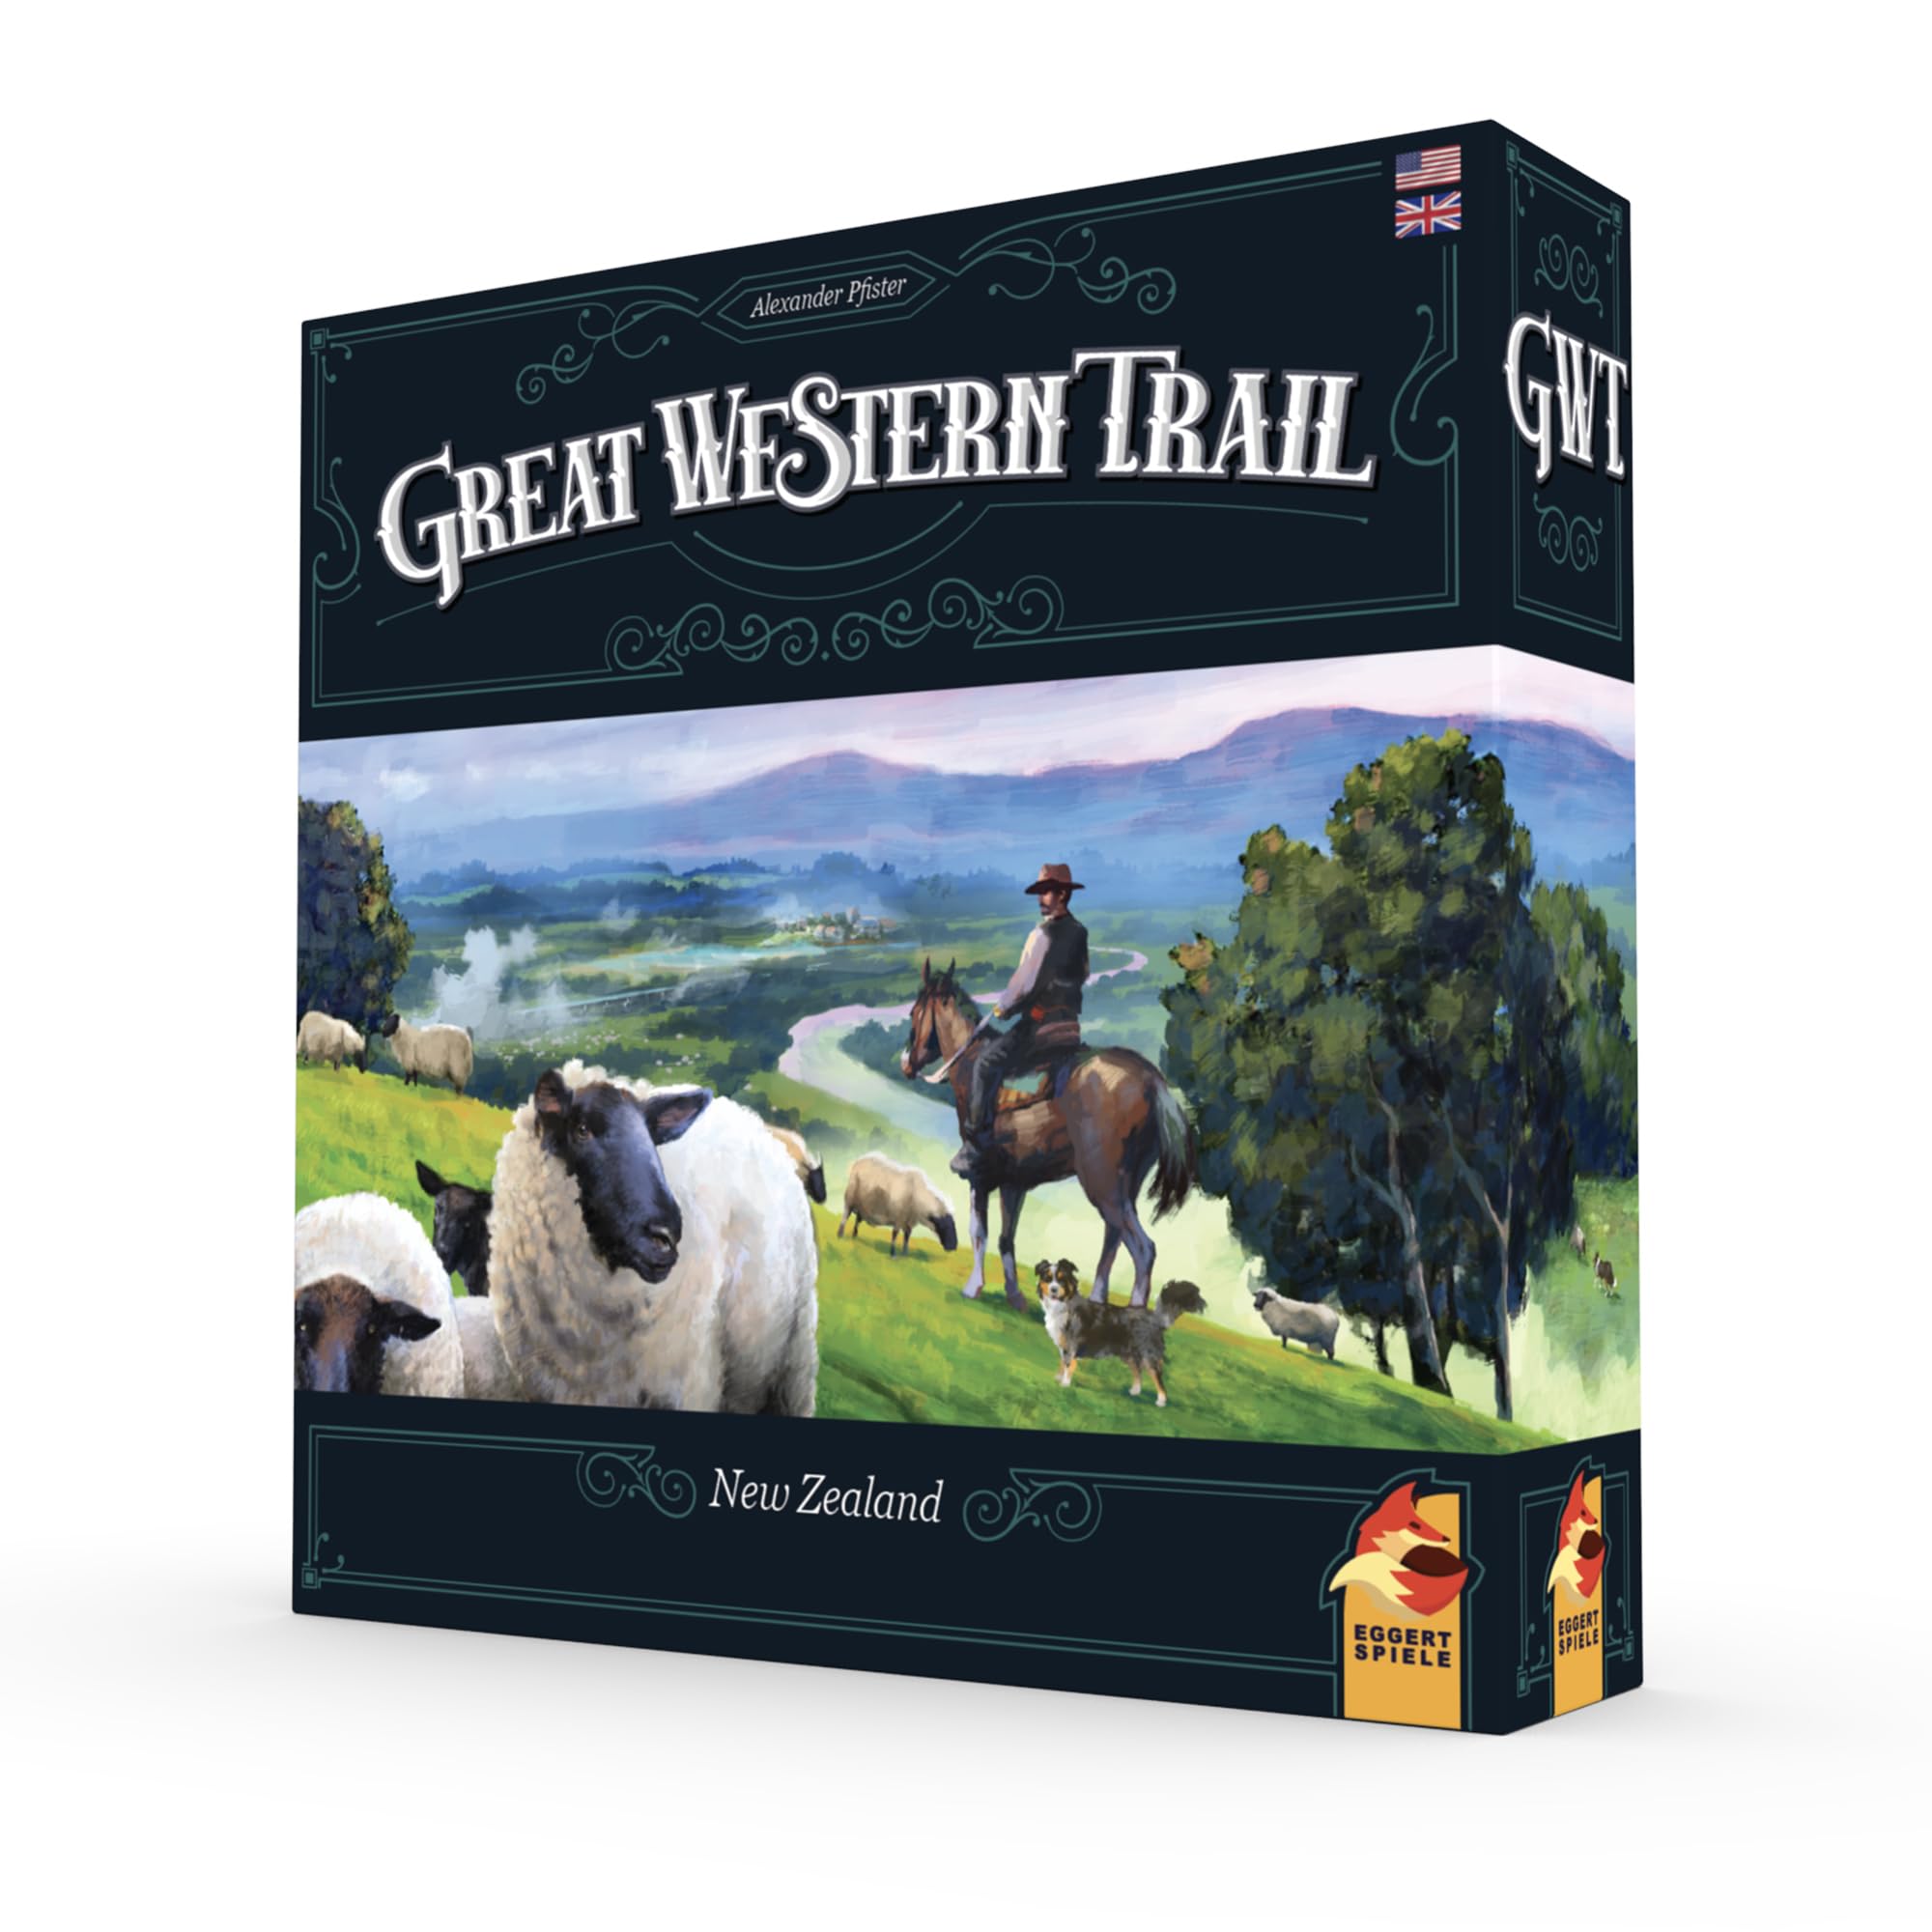 Great Western Trail 2nd Edition New Zealand Board Game - Cowboy Themed Strategy Game for Kids and Adults, Ages 12+, 1-4 Players, 70-150 Minute Playtime, Made by Eggertspiele